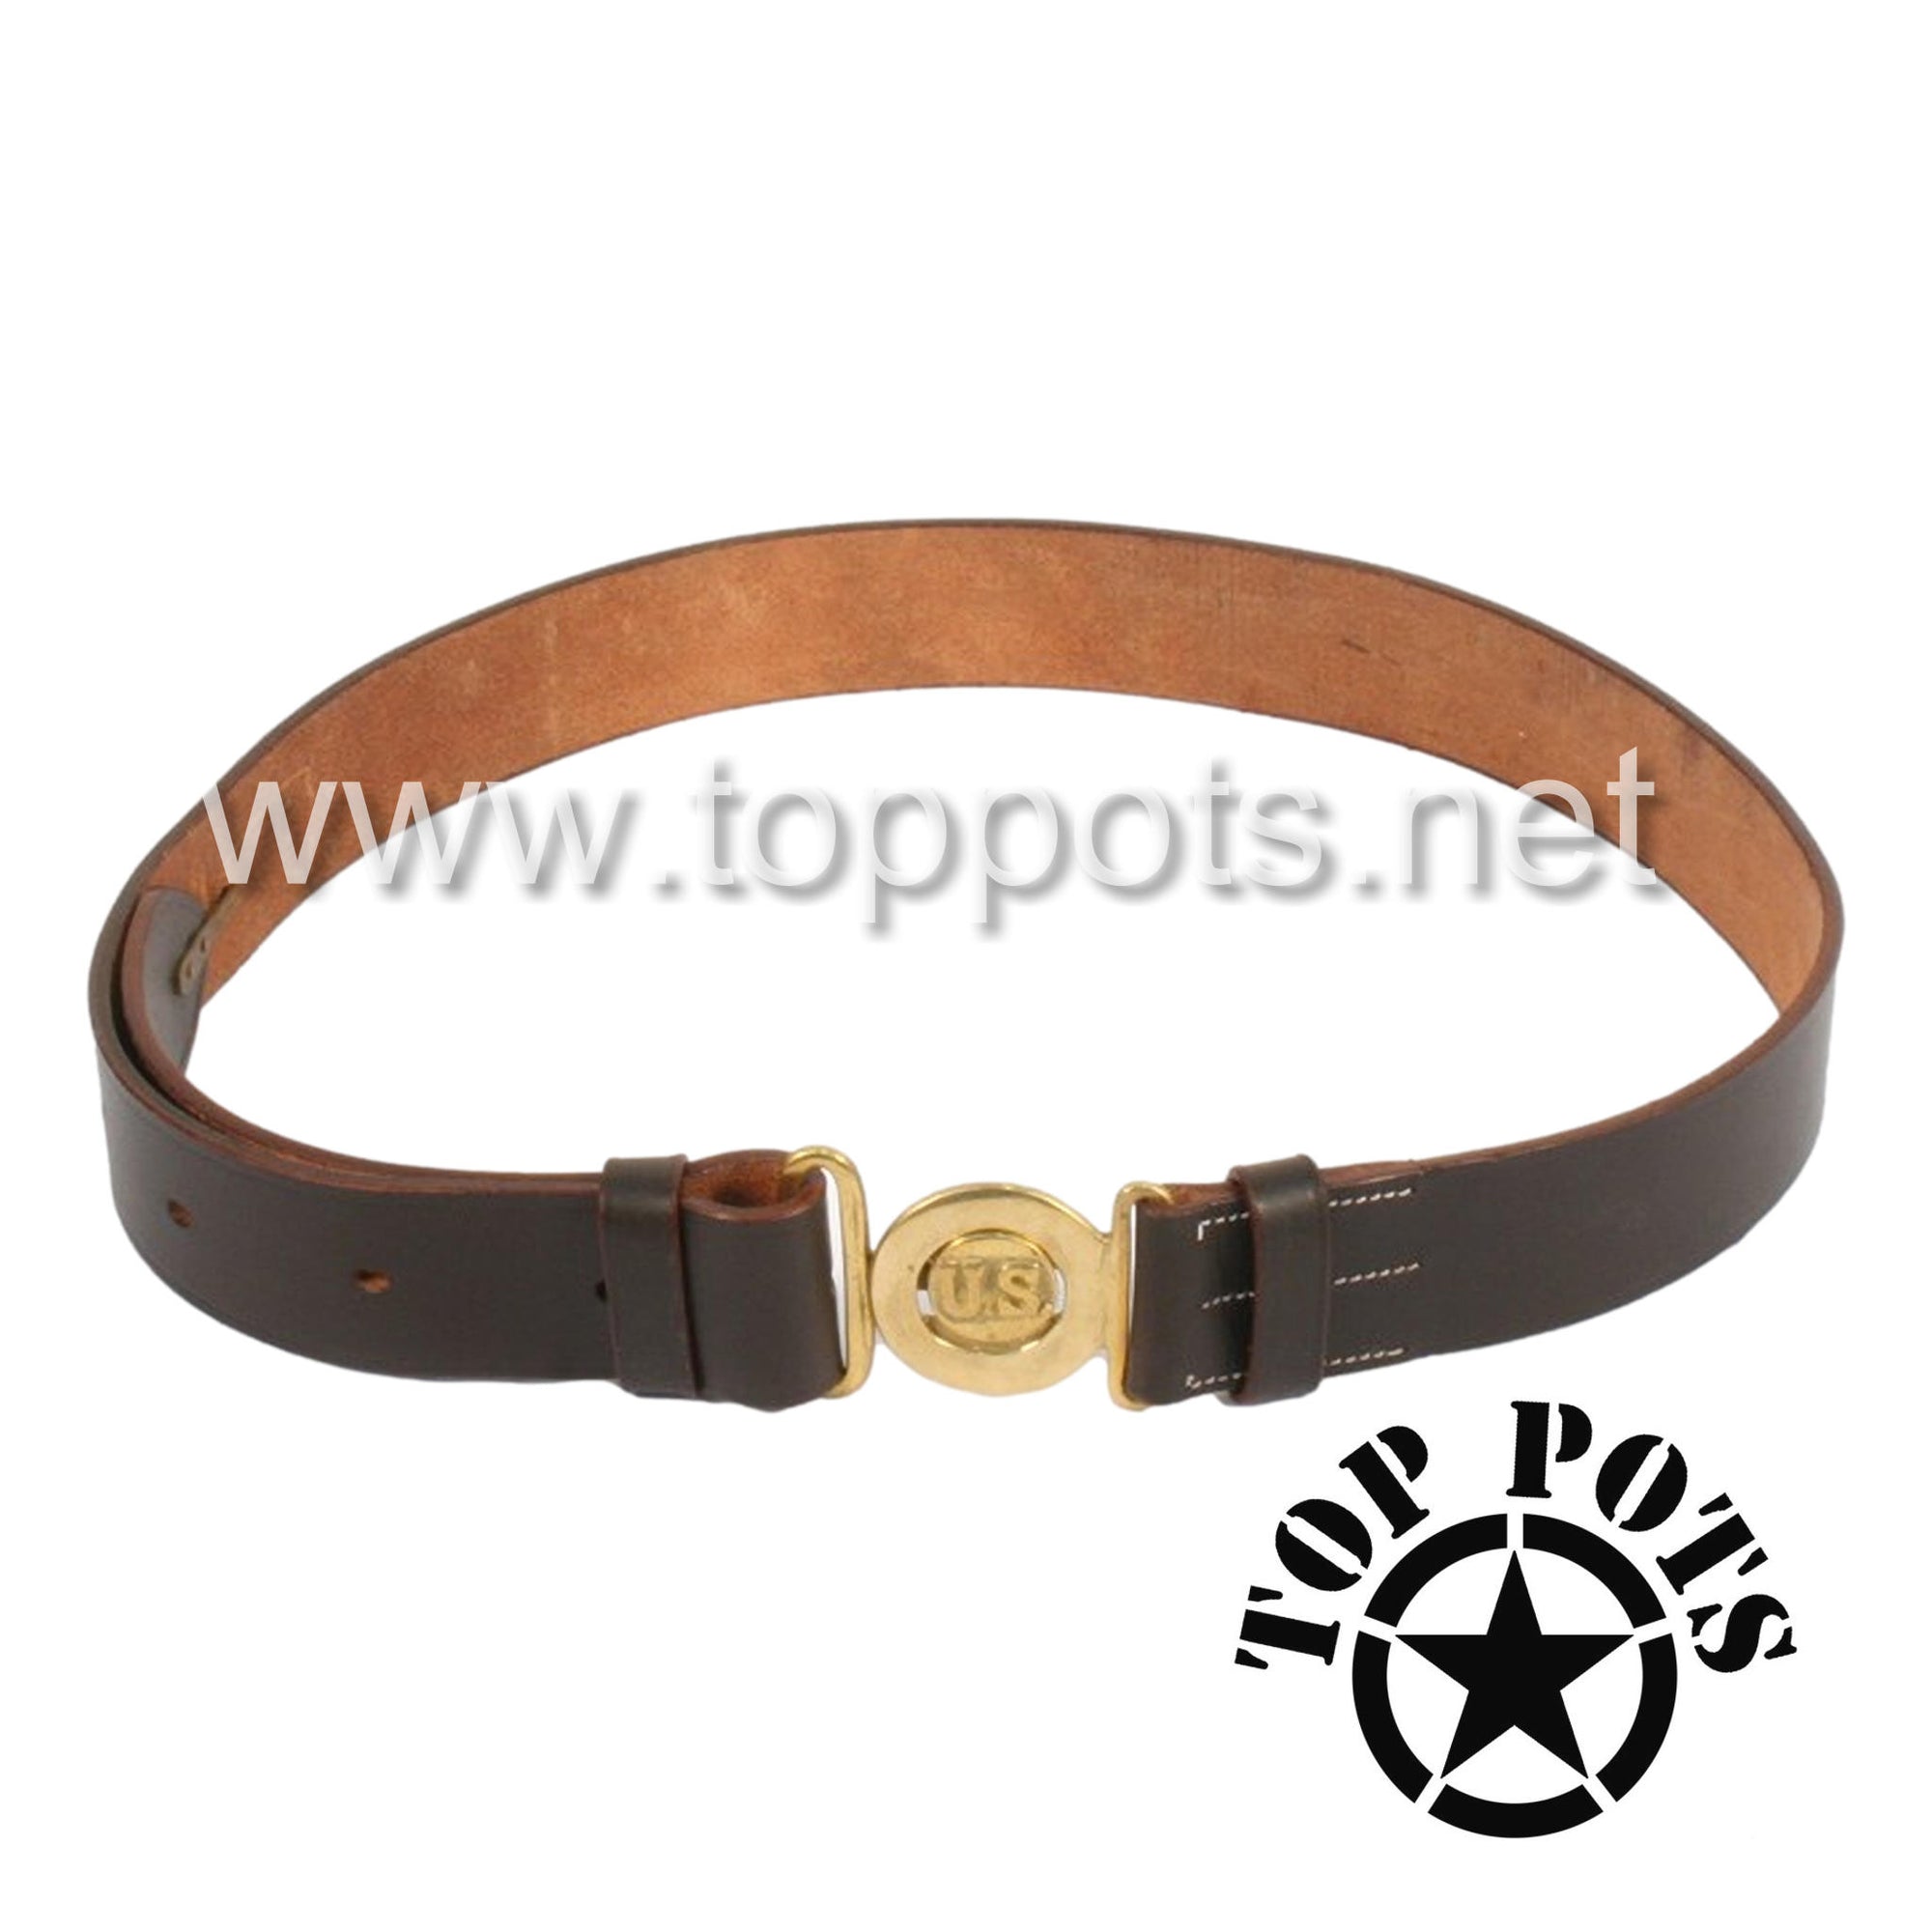 WWII US Army Reproduction M1911 Leather Officer Waist Belt – Brass Oval US Buckle (Belt and Buckle Only)